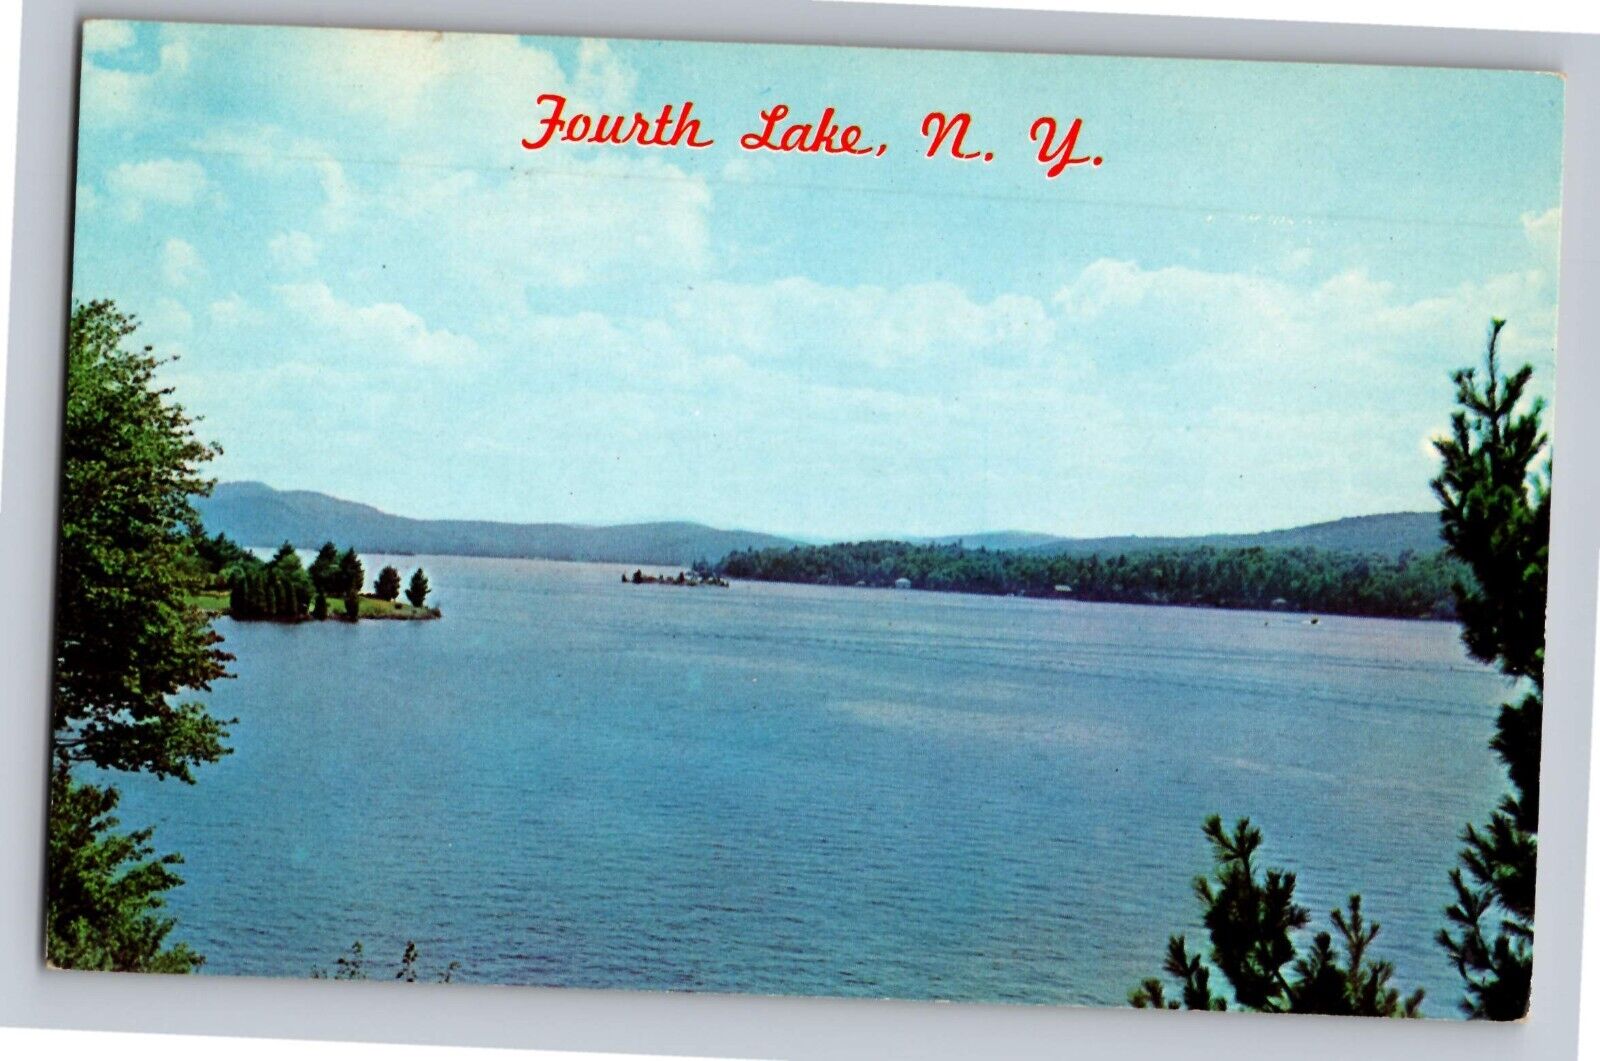 Postcard Lot of four cards of Fourth Lake N.Y. OF DIFFERENT VIEWS All U/P   C-14